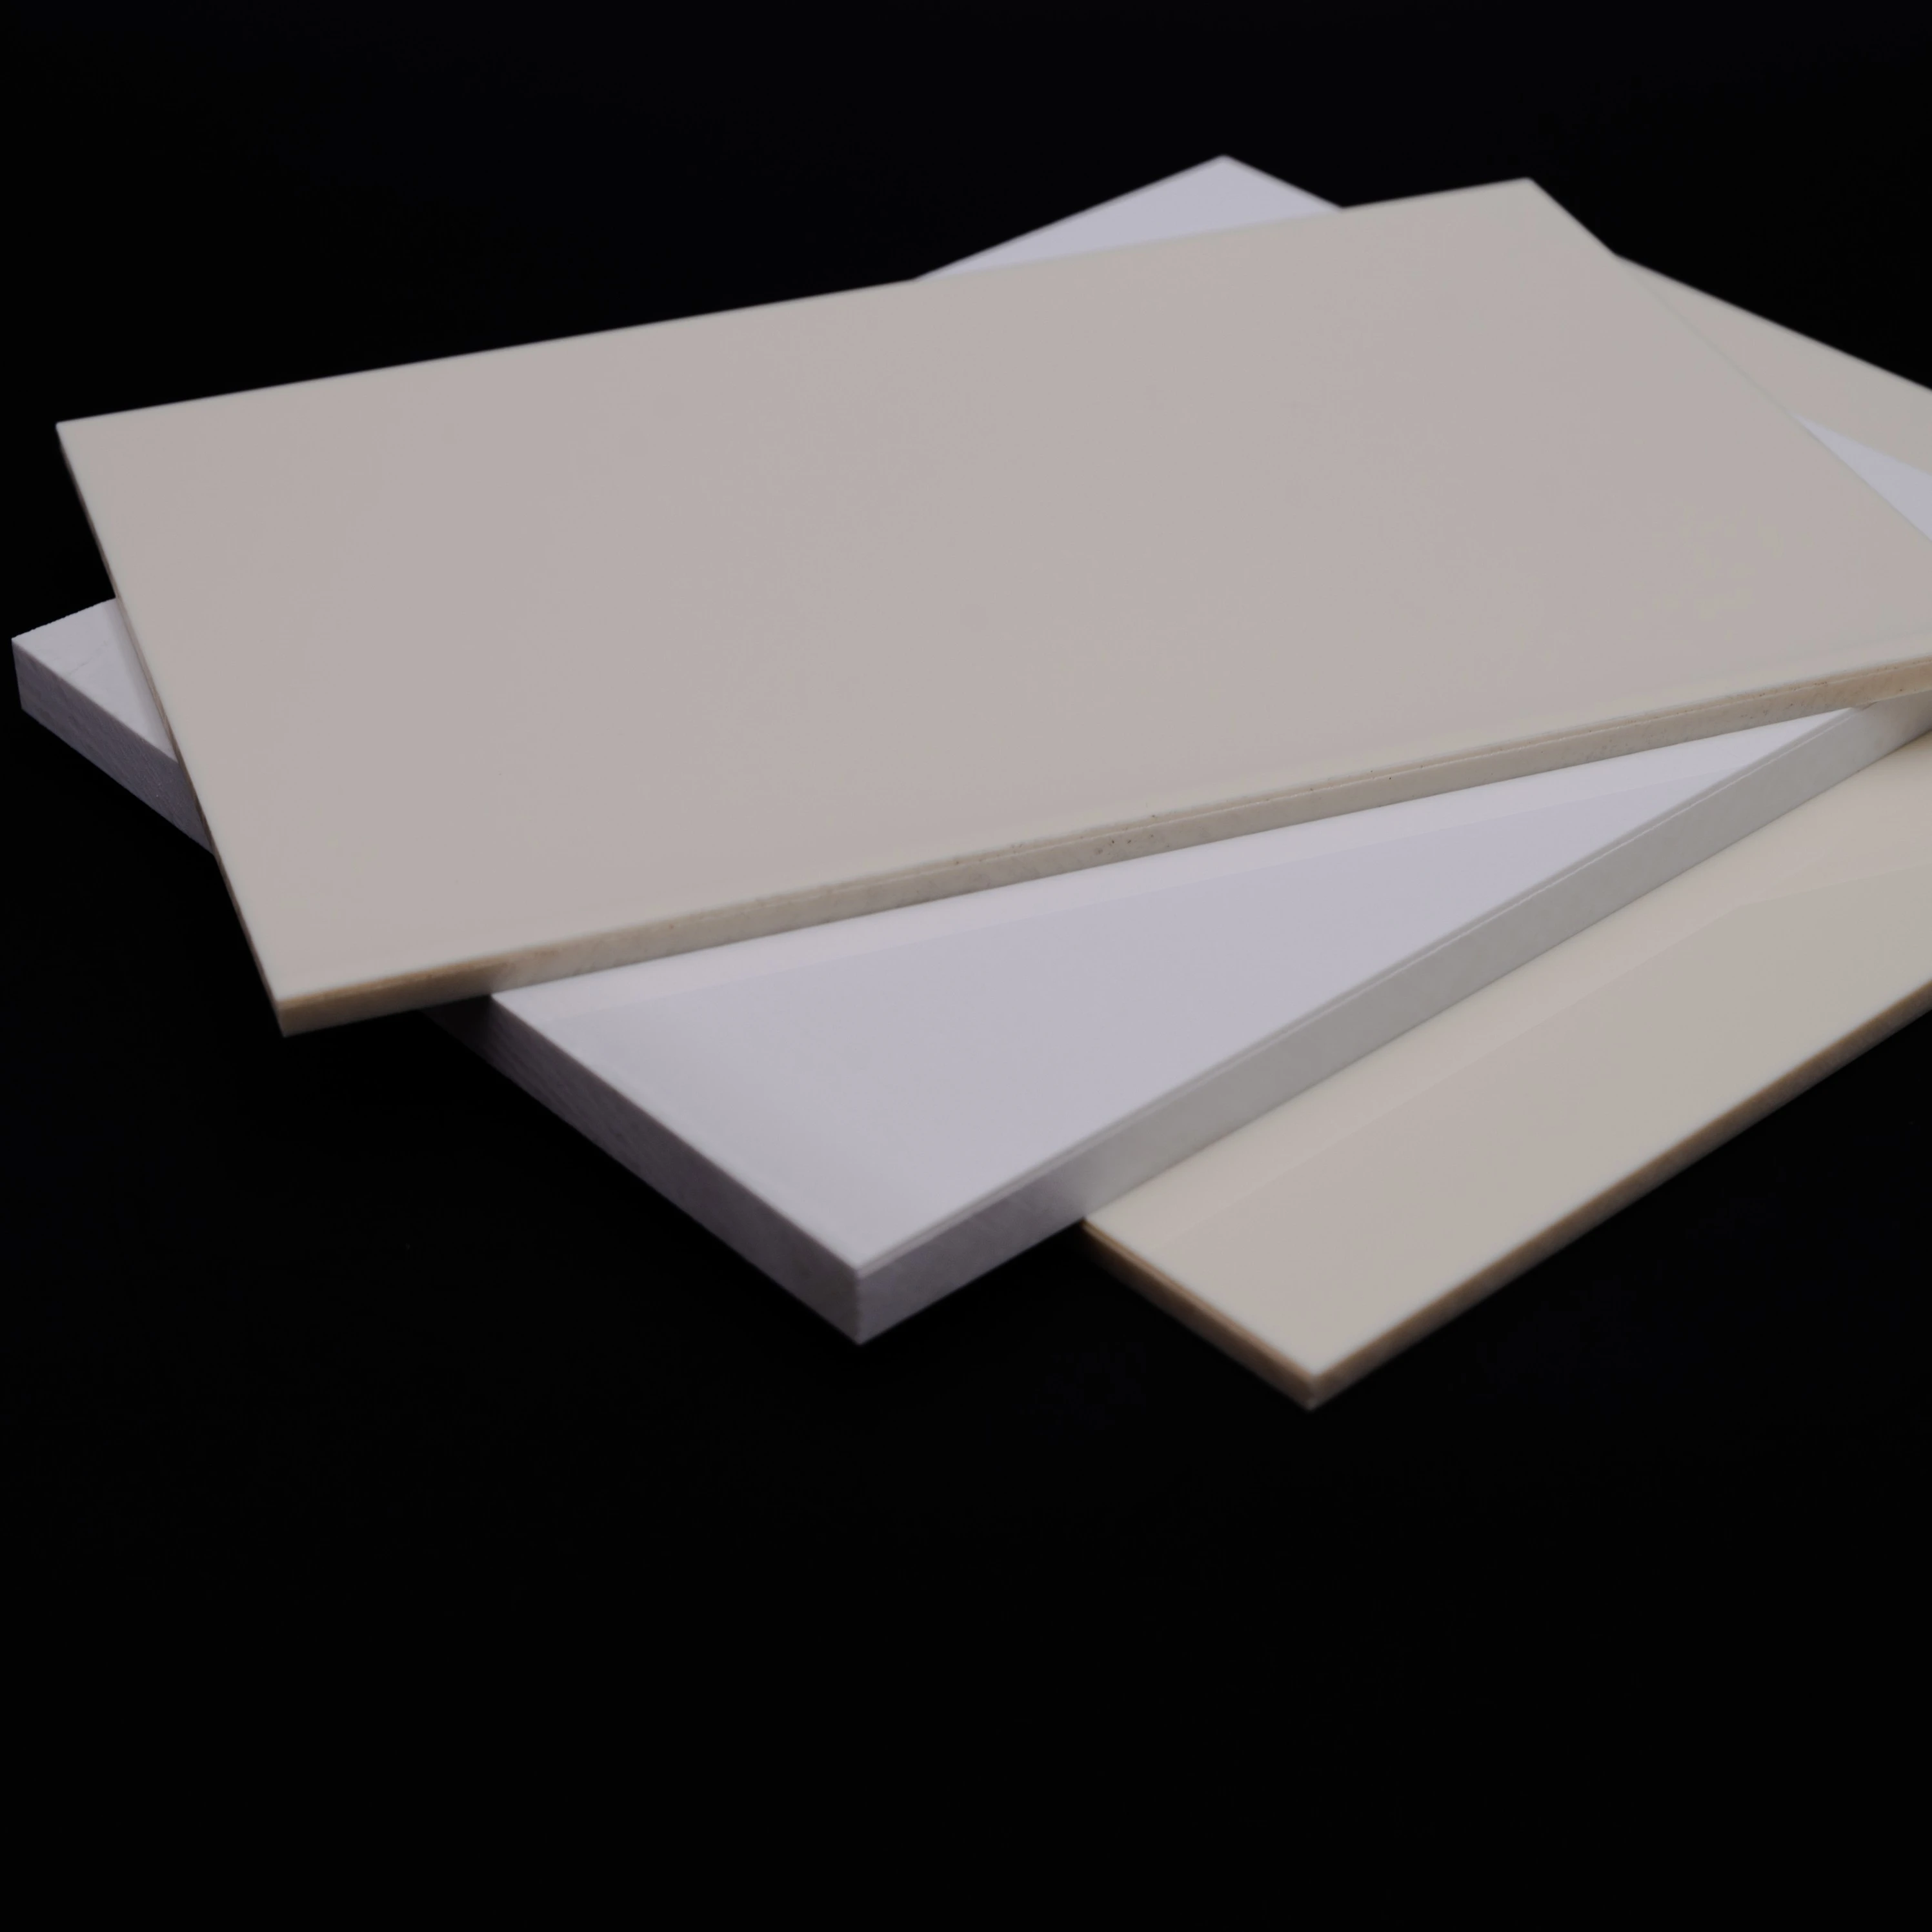 Andisco High Performance 4mm Hard Coating Acrylic Panels Durable Perspex Cast Plastic Sheet Acrylic High Wear Resistance